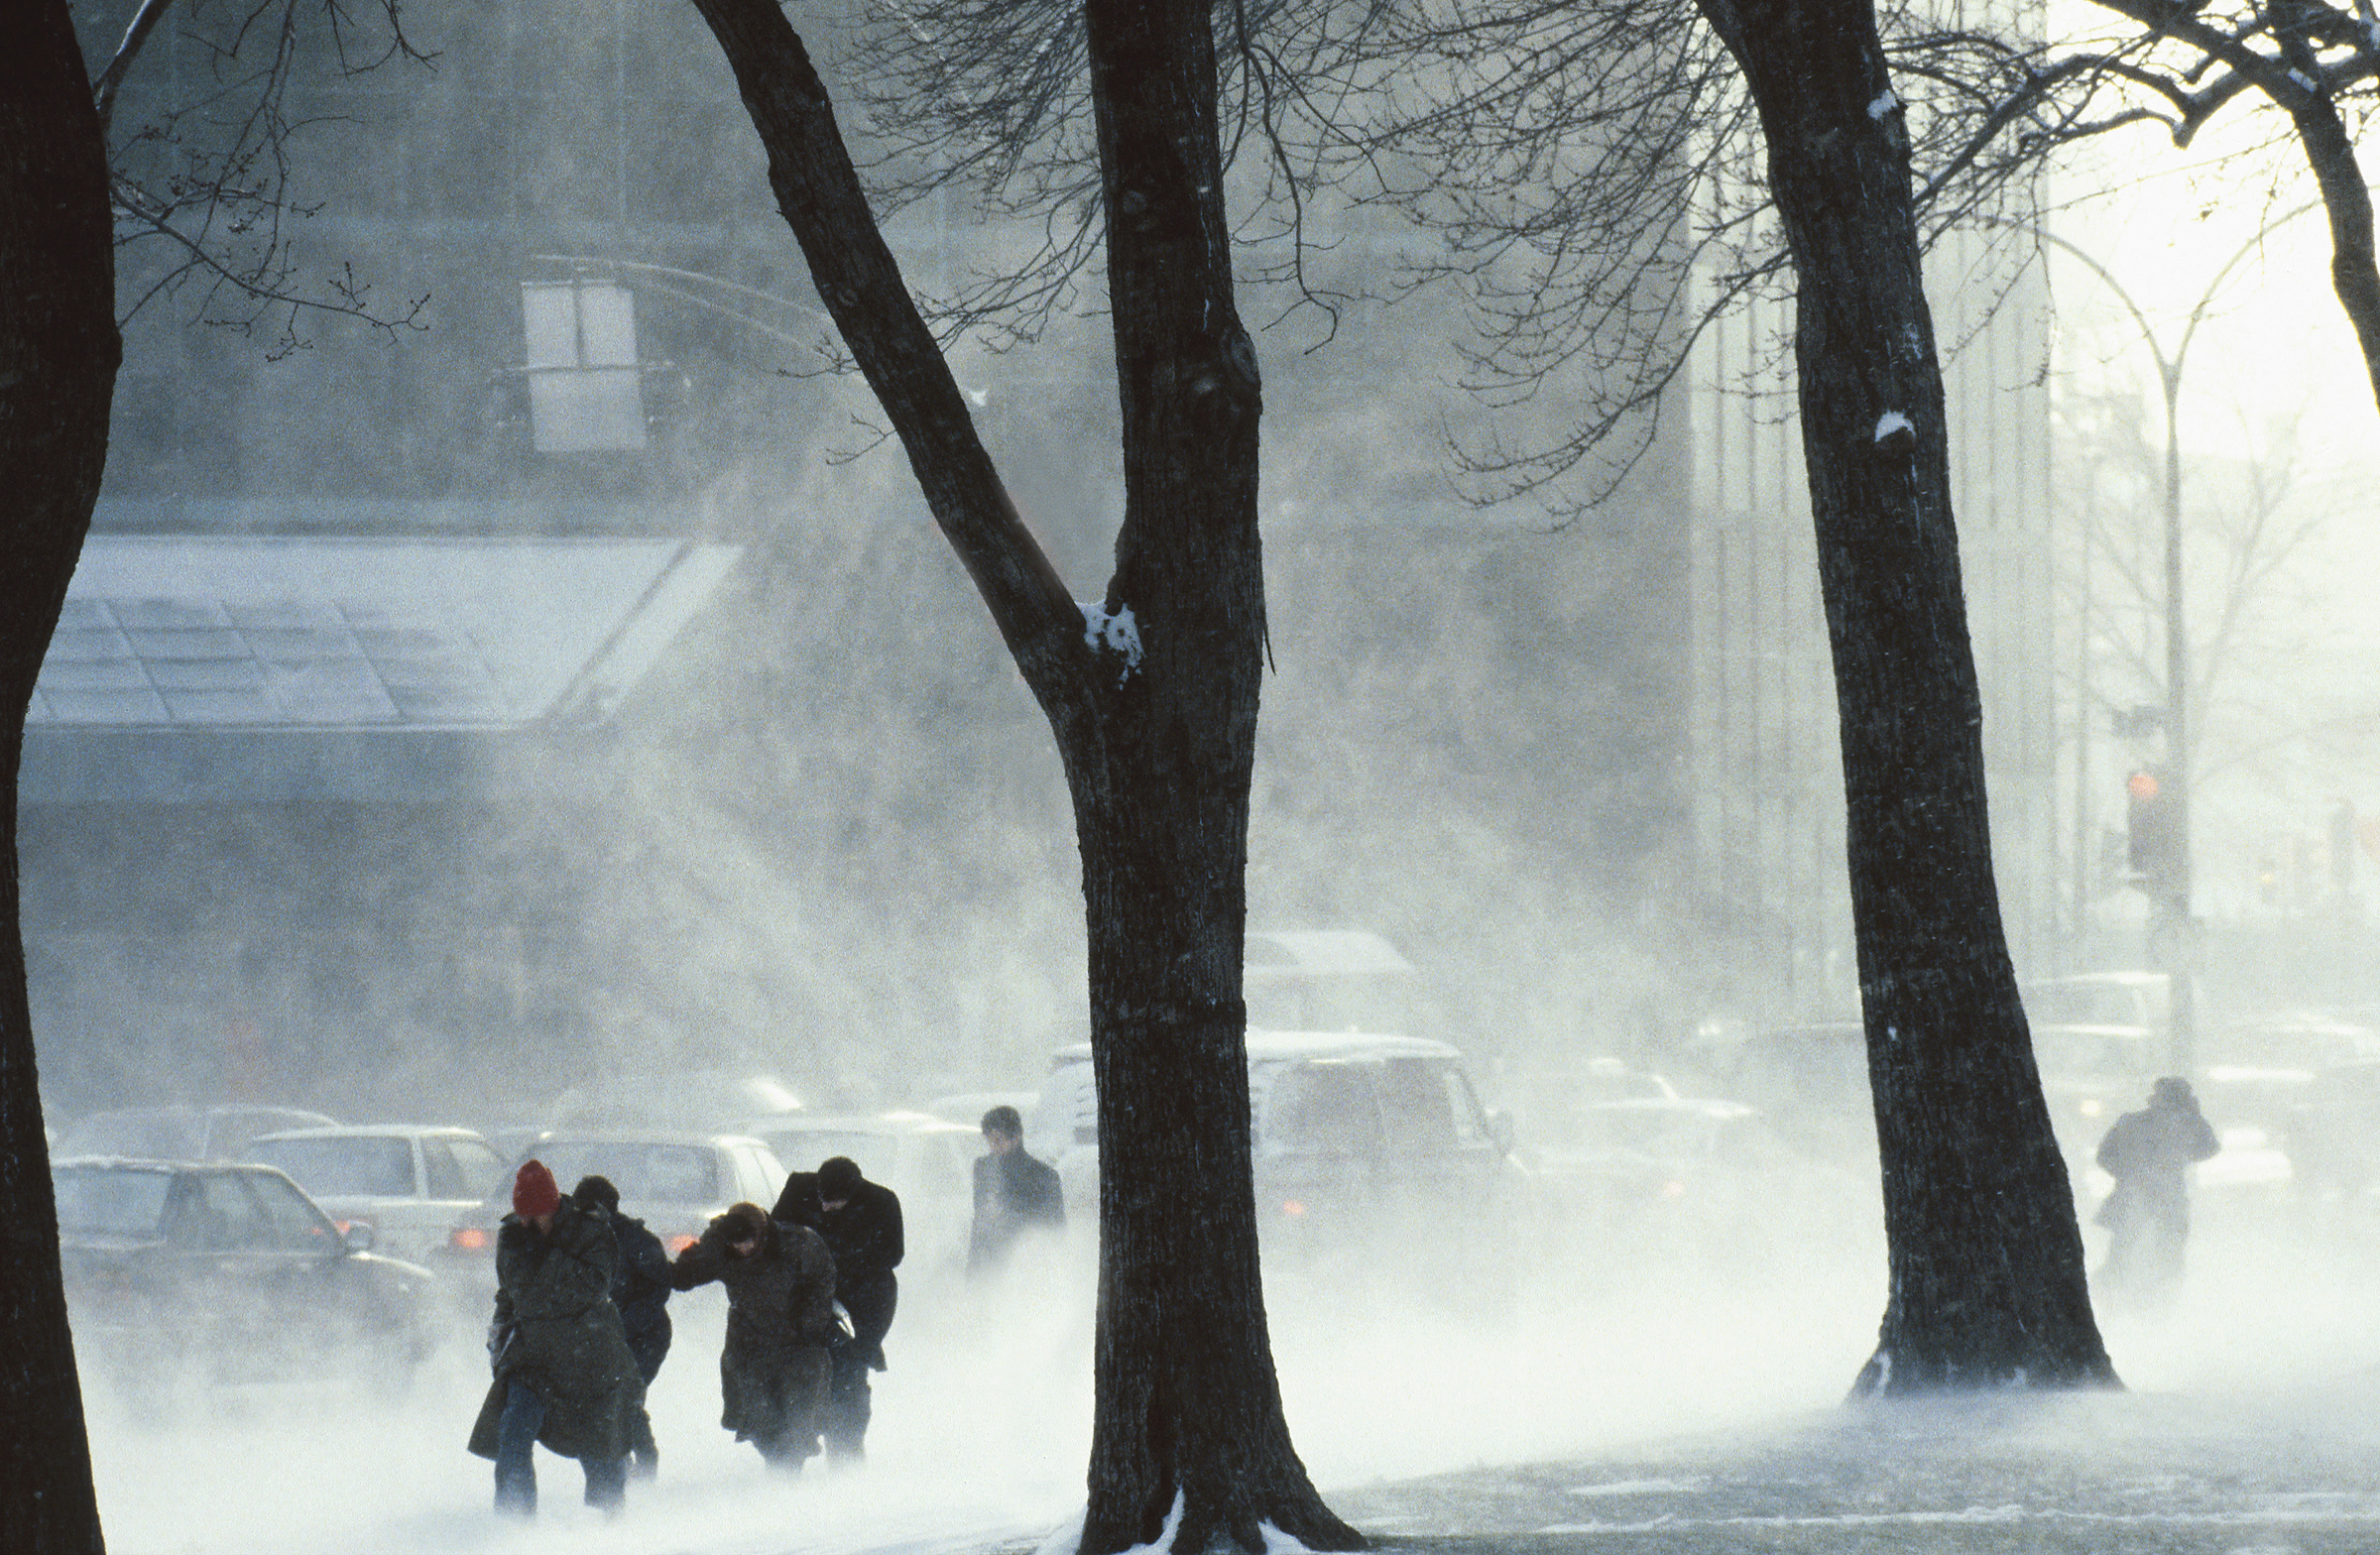 Photo provided by Environment Canada (photo.com) “ People huddle against the cold wind”.